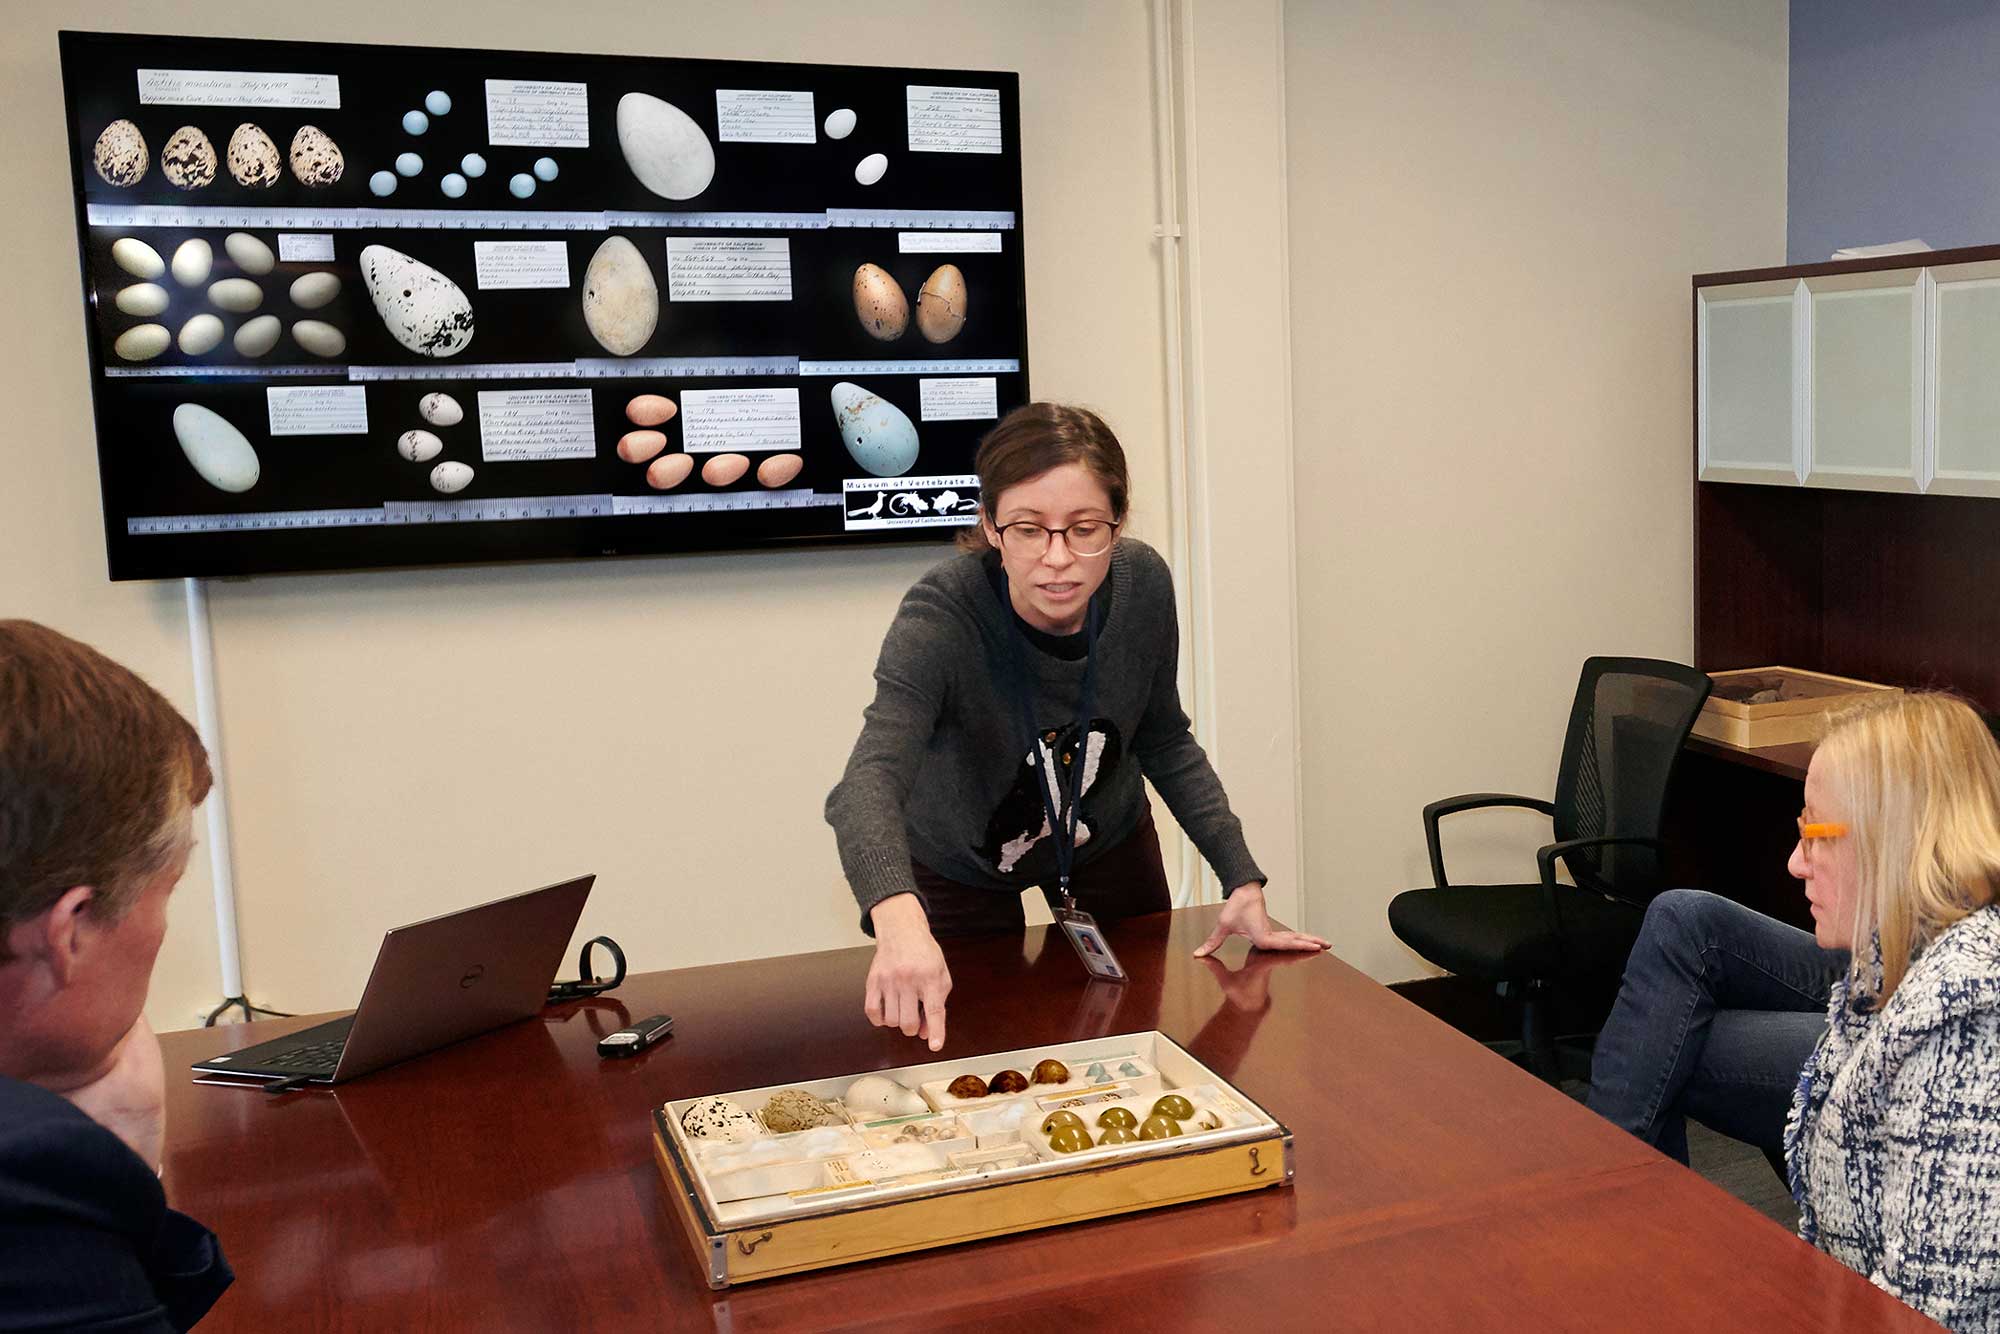 A woman points to egg specimens in a tray while two people look on.